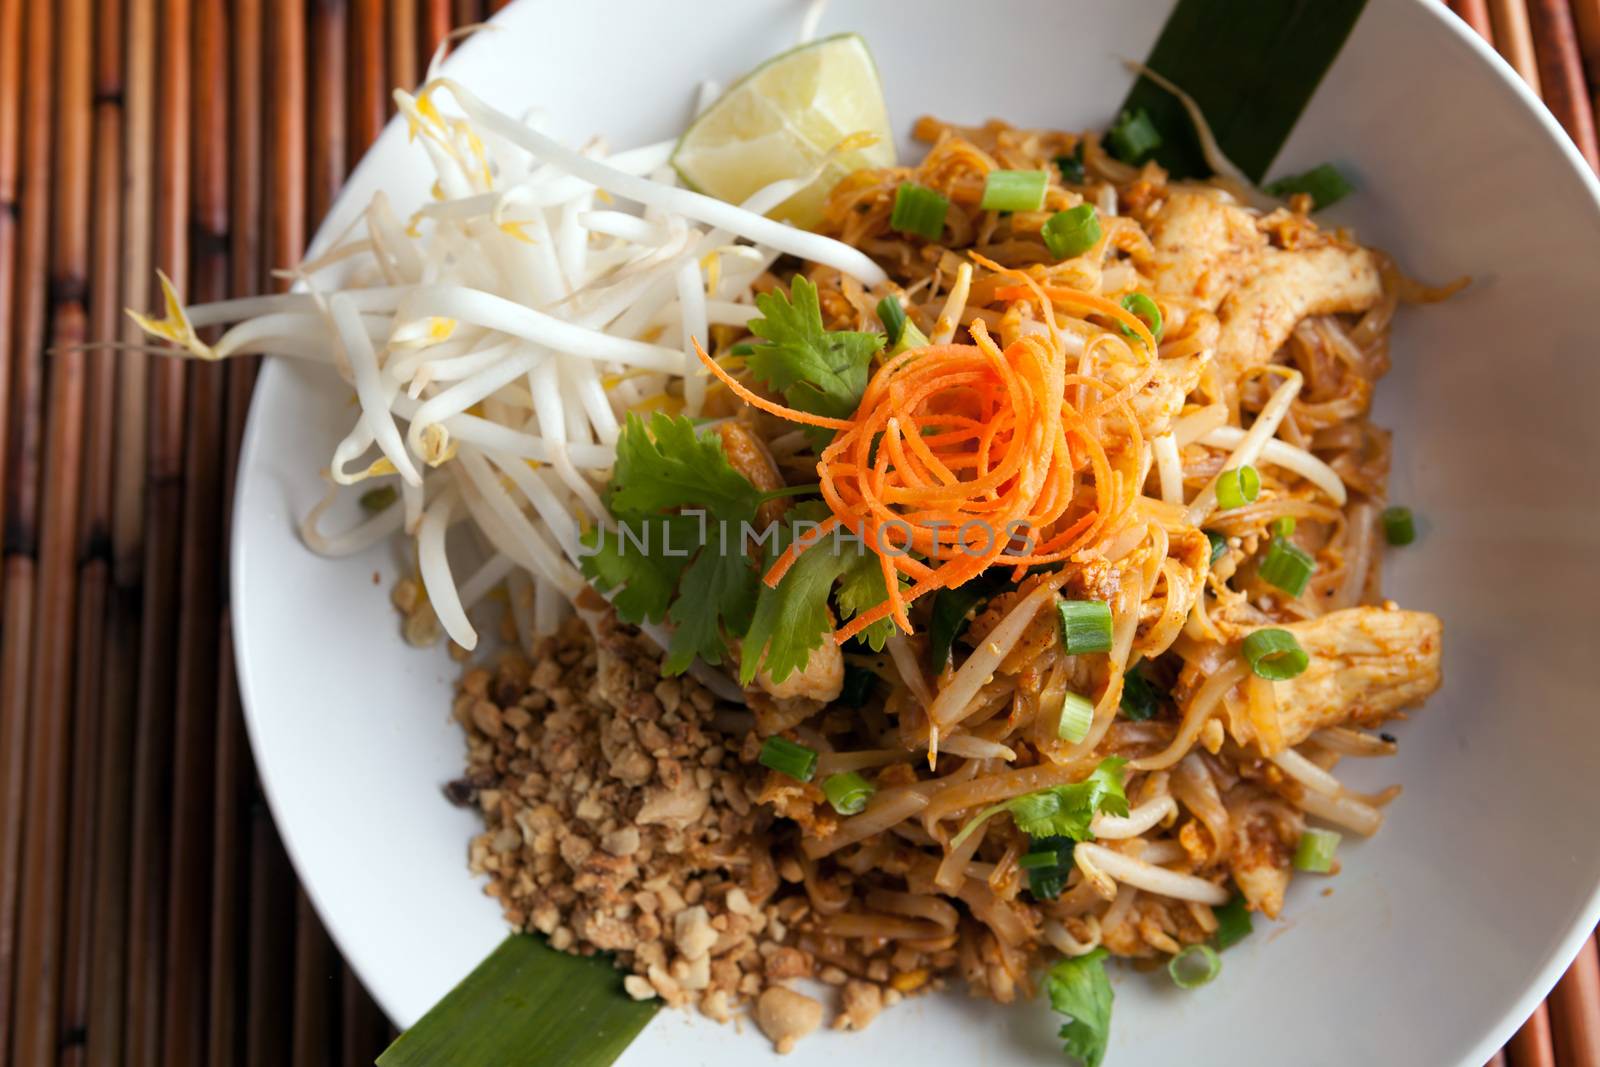 Chicken pad Thai dish of stir fried rice noodles with a contemporary presentation.